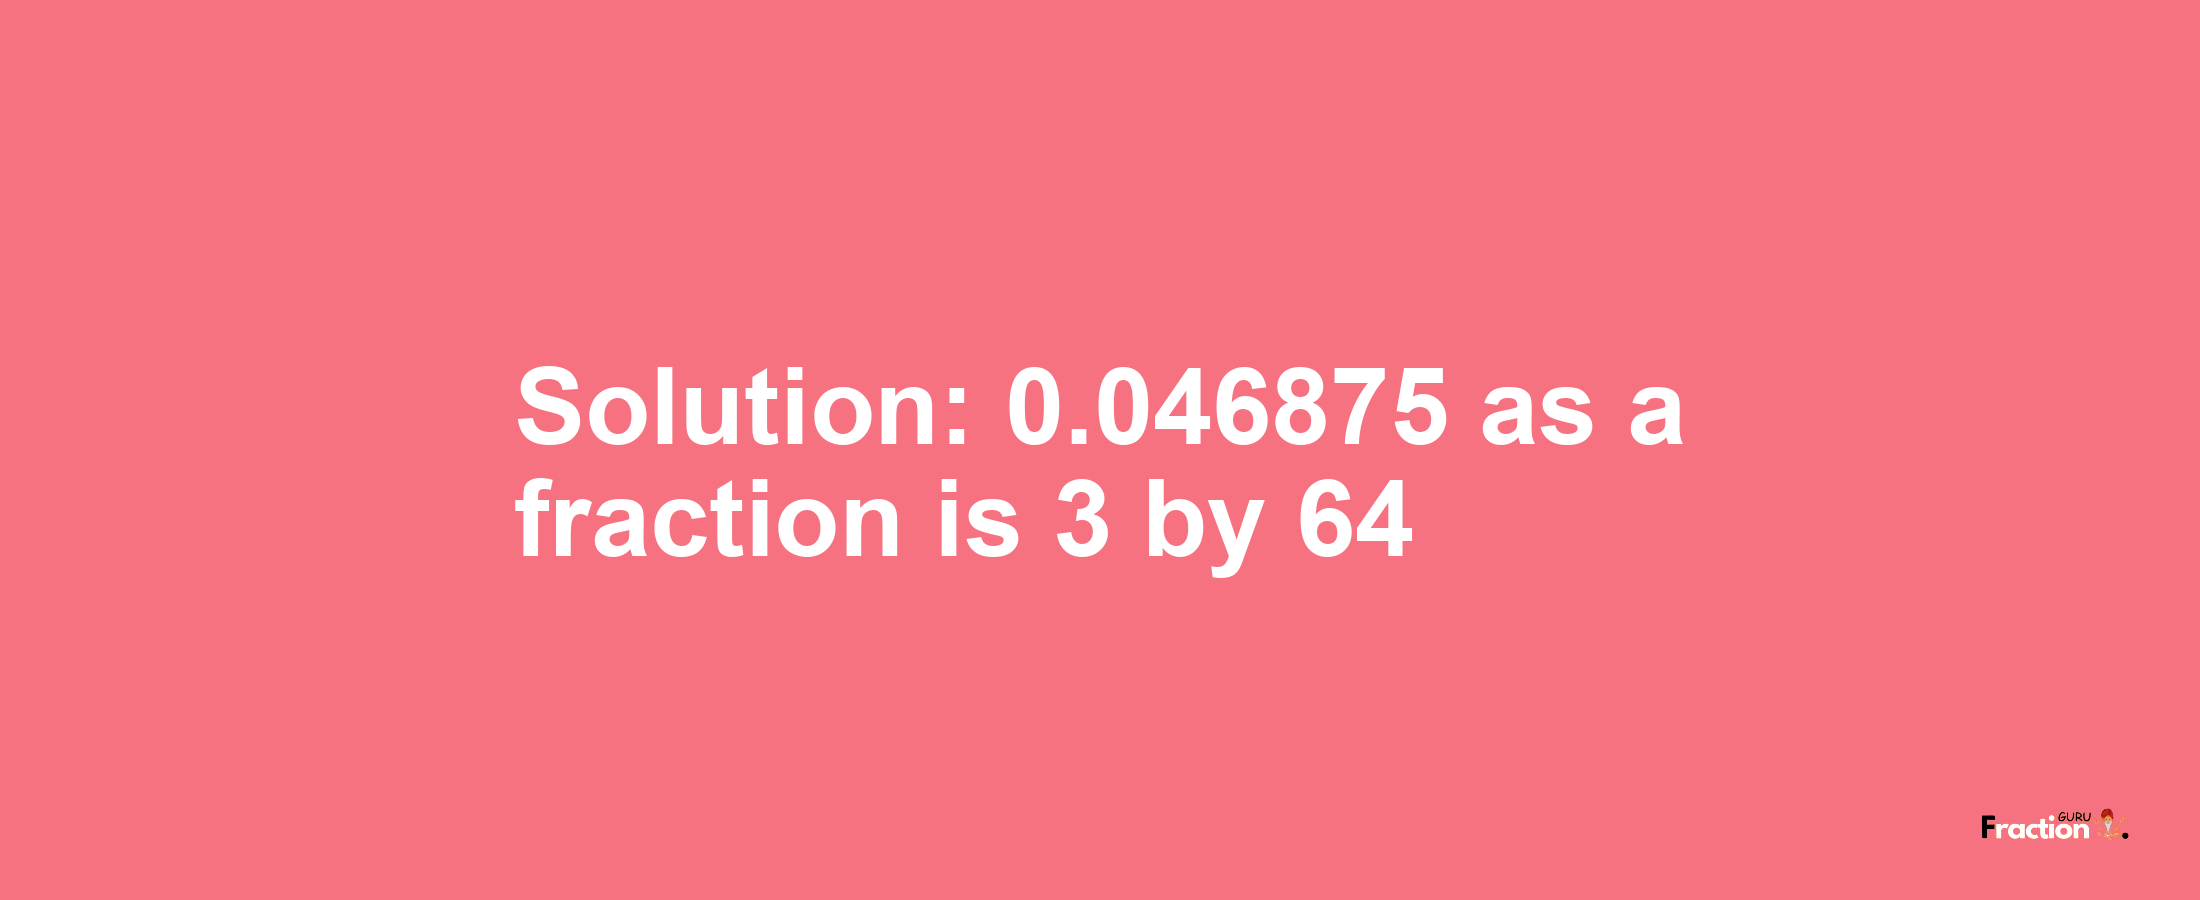 Solution:0.046875 as a fraction is 3/64